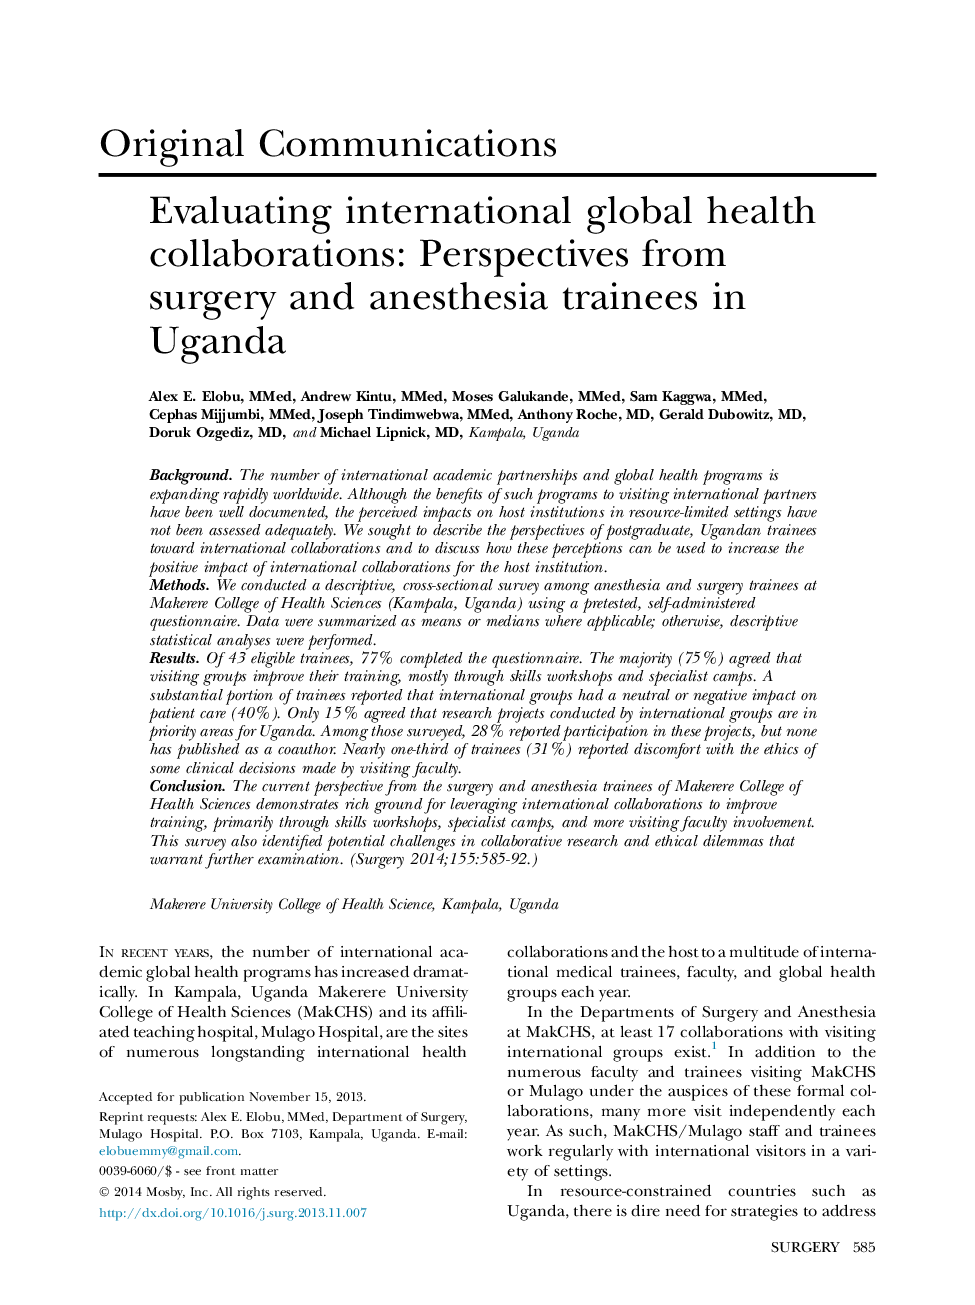 Evaluating international global health collaborations: Perspectives from surgery and anesthesia trainees in Uganda